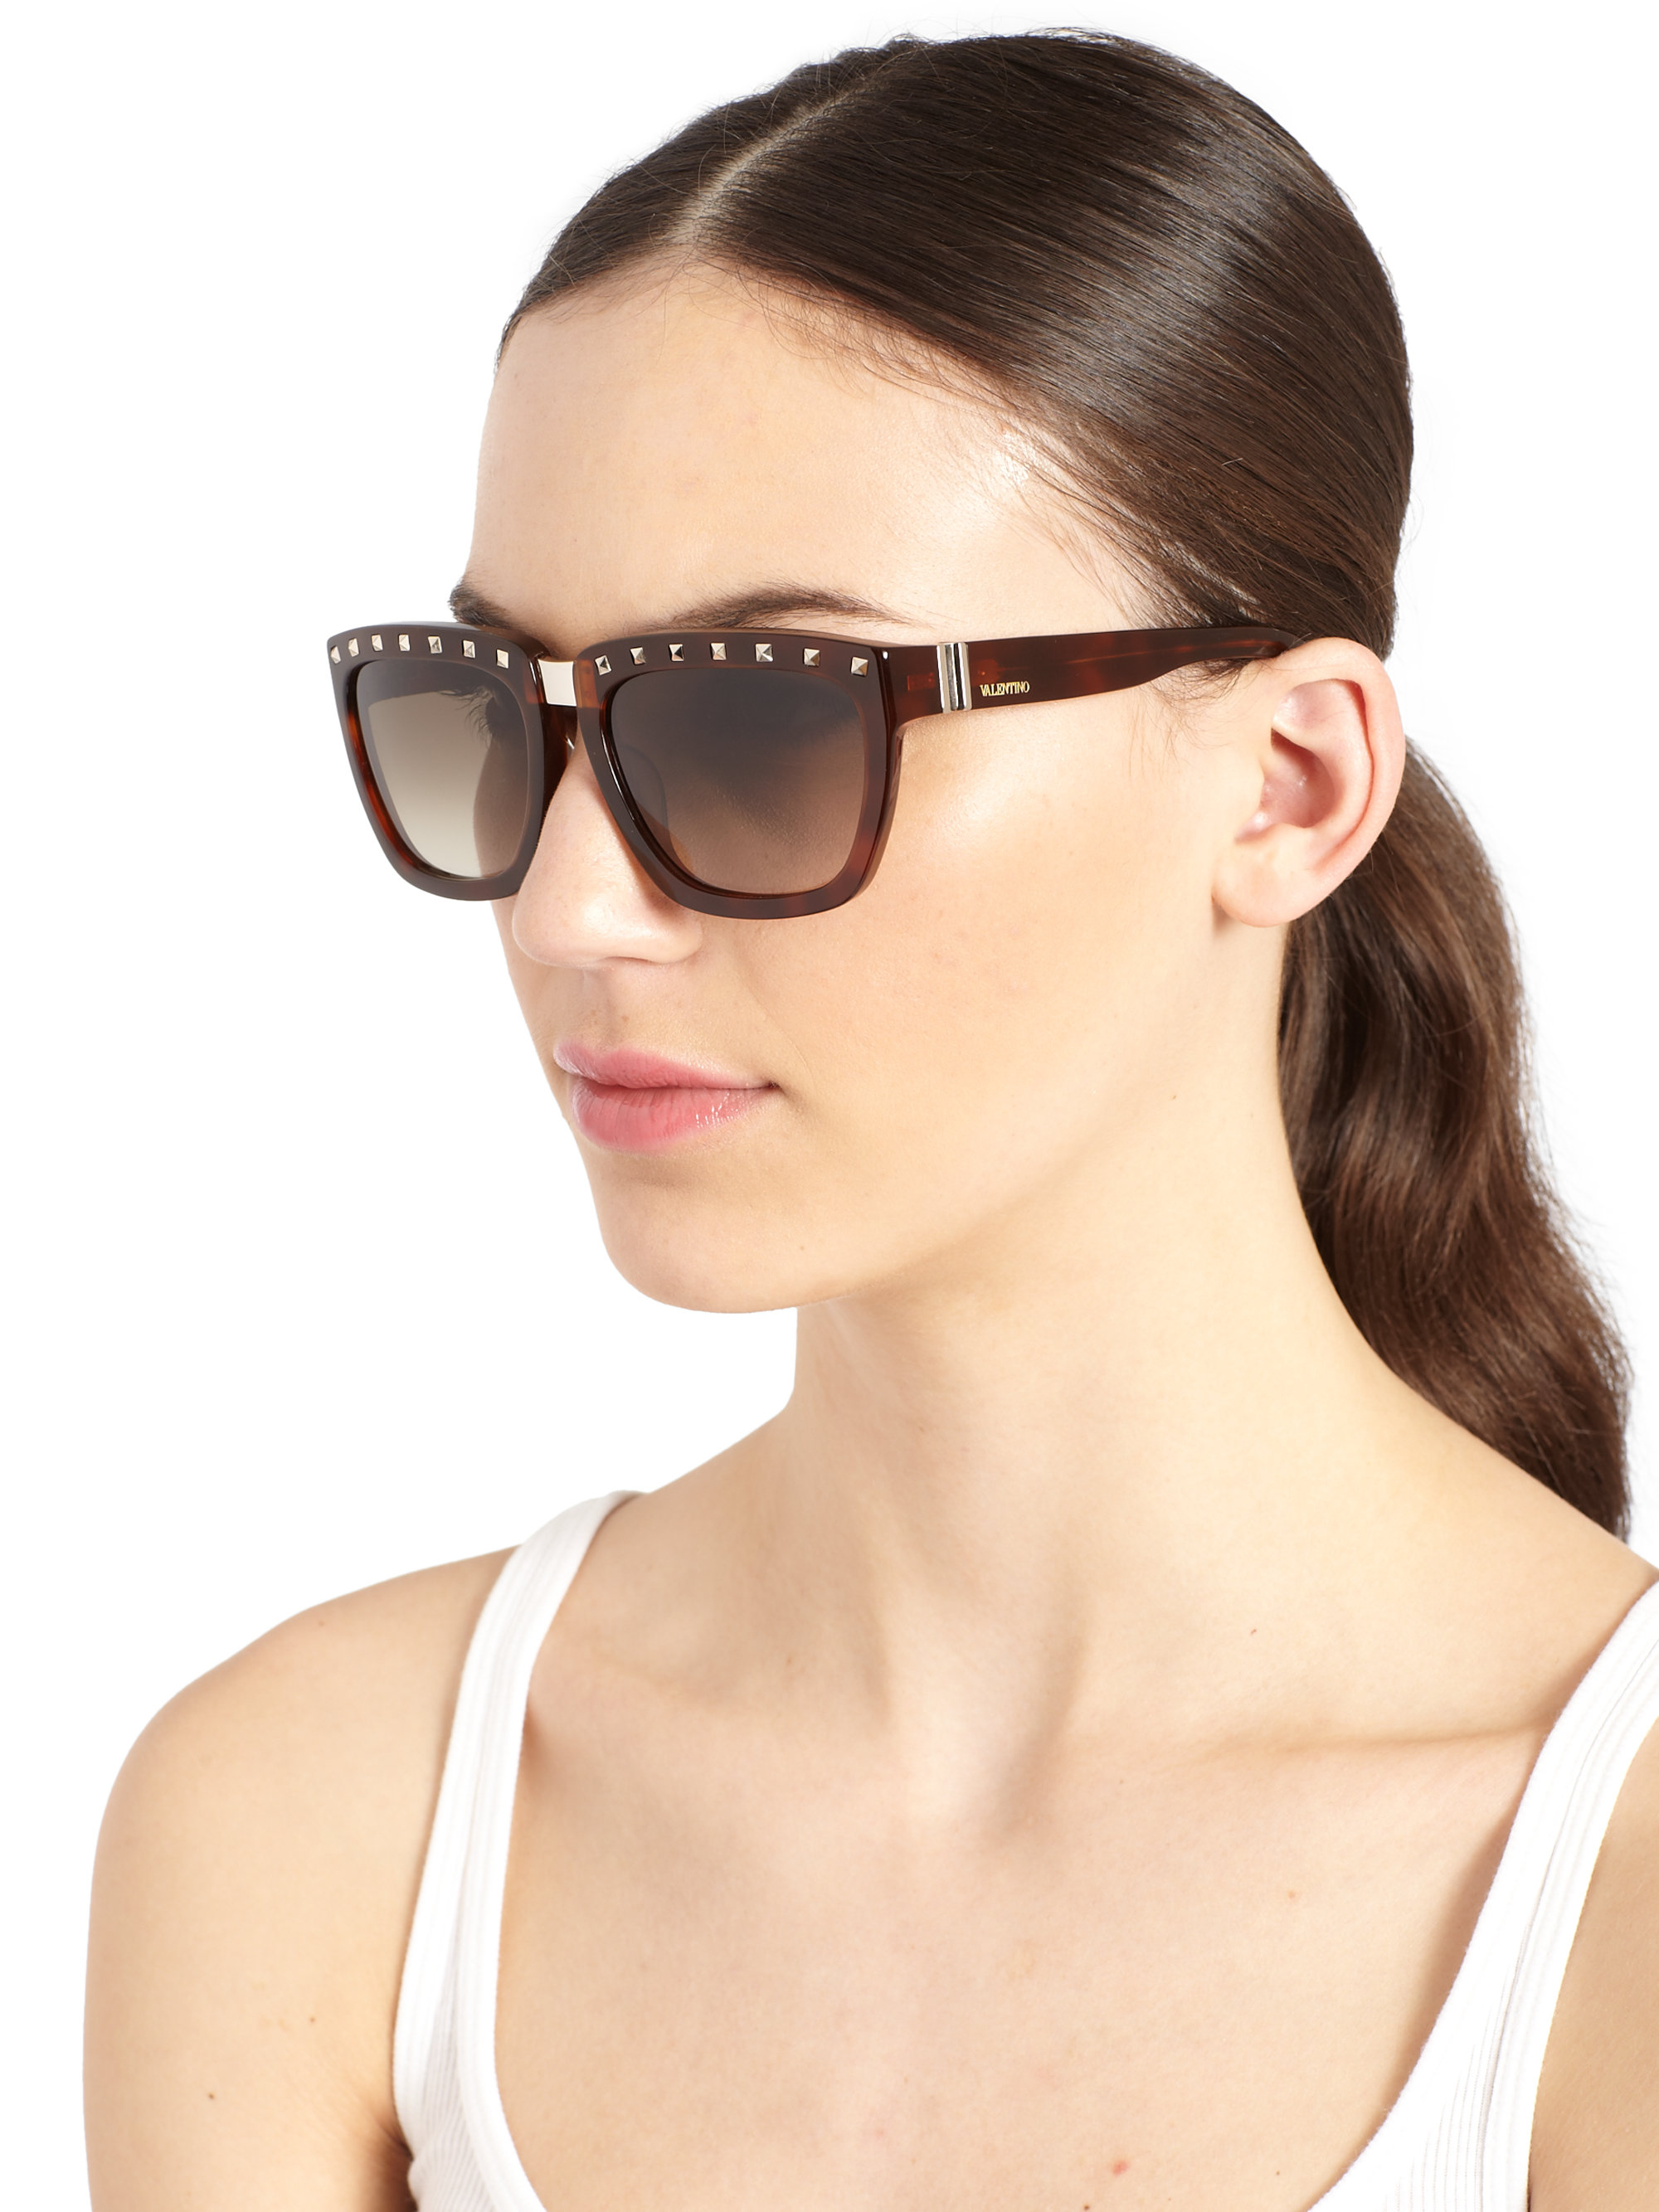 buy > valentino studded sunglasses, Up to 69% OFF